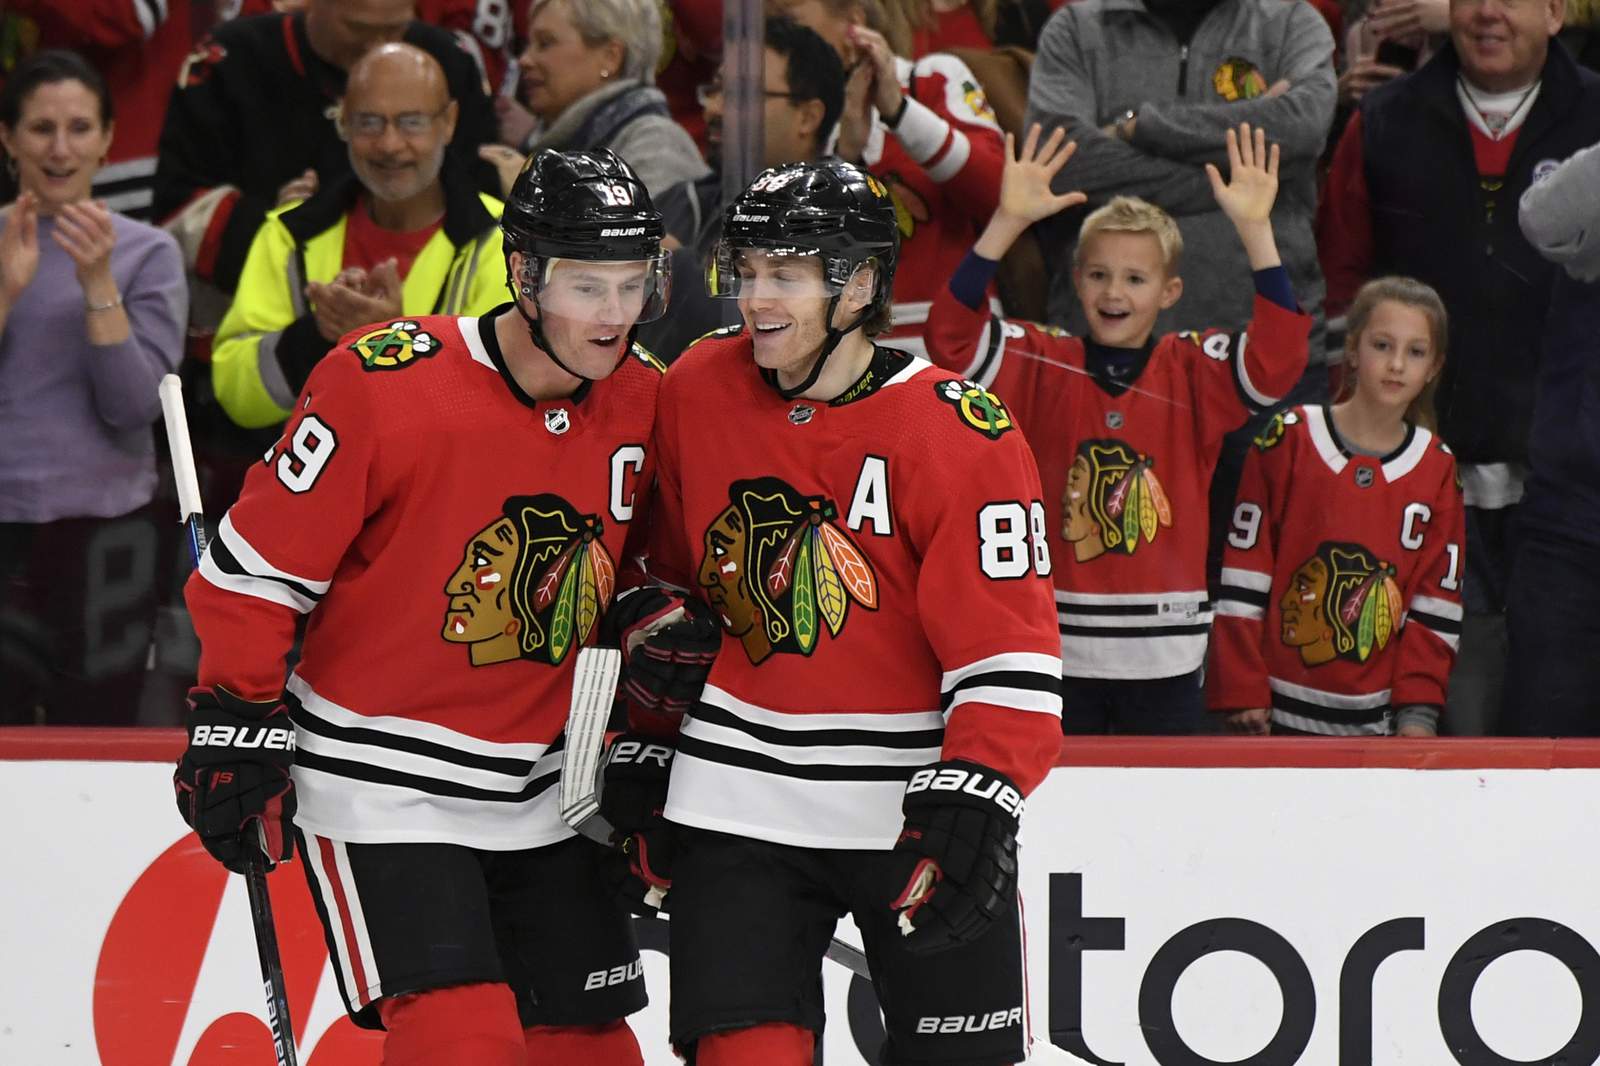 In wake of Indians' decision, Blackhawks stay with team name